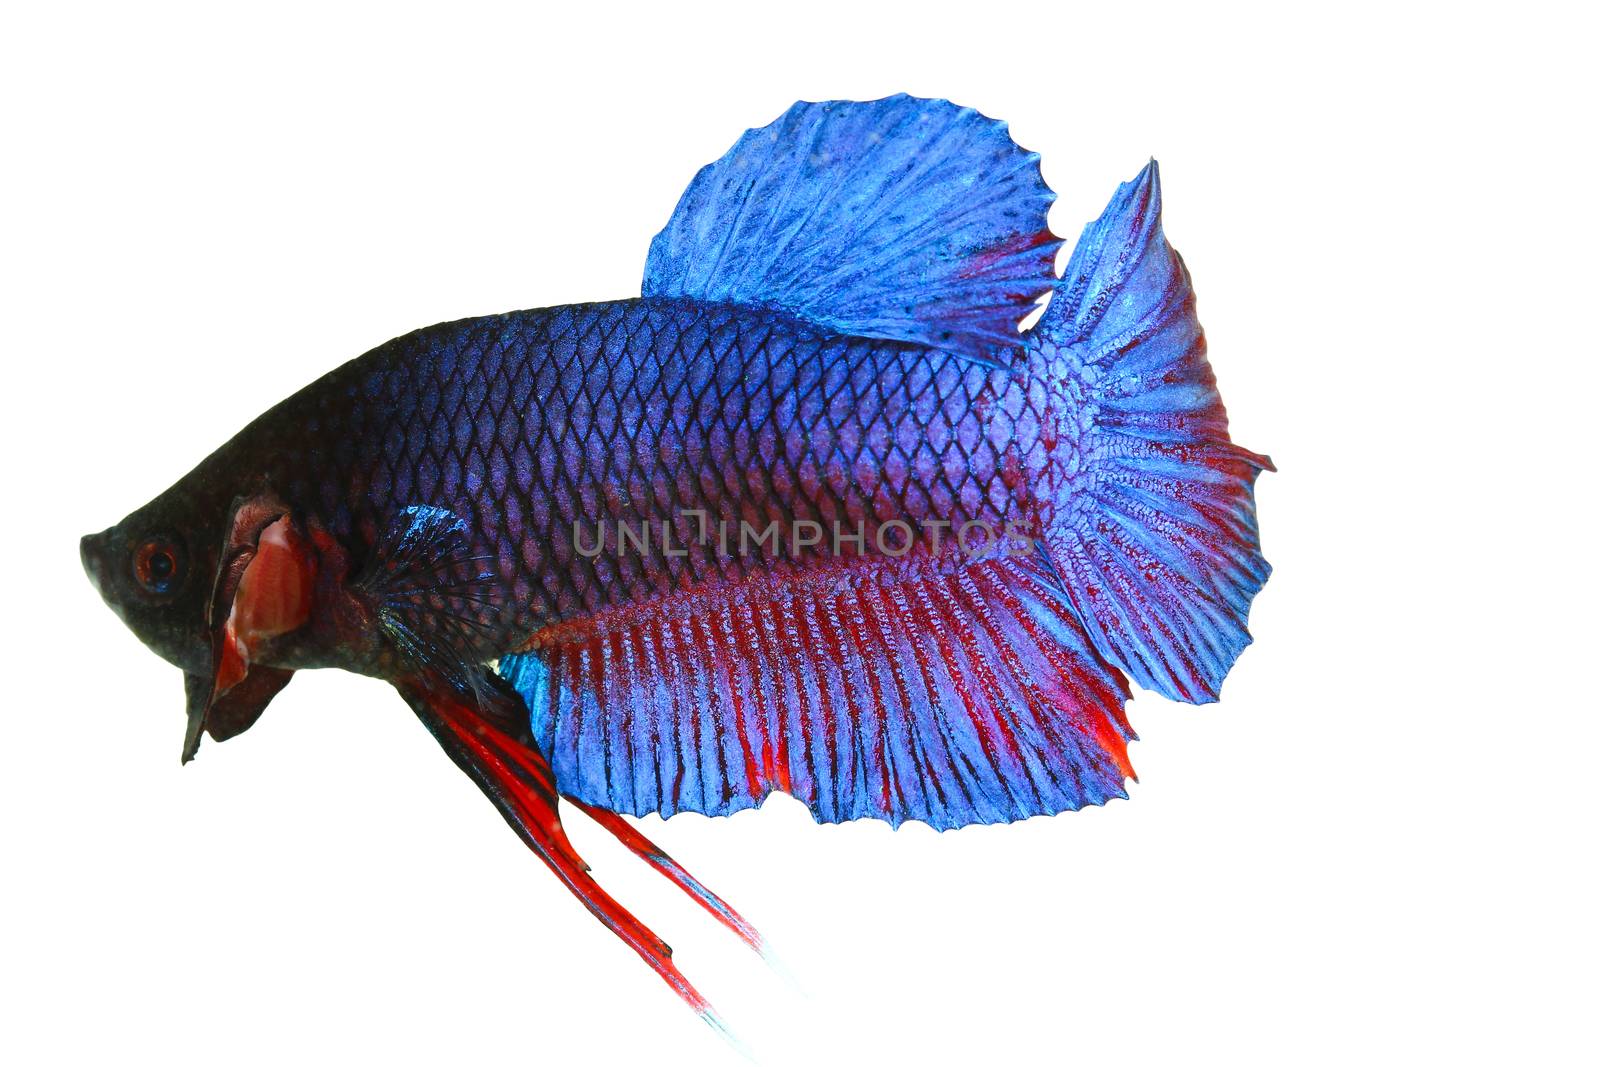 siamese fighting fish , betta isolated on white background